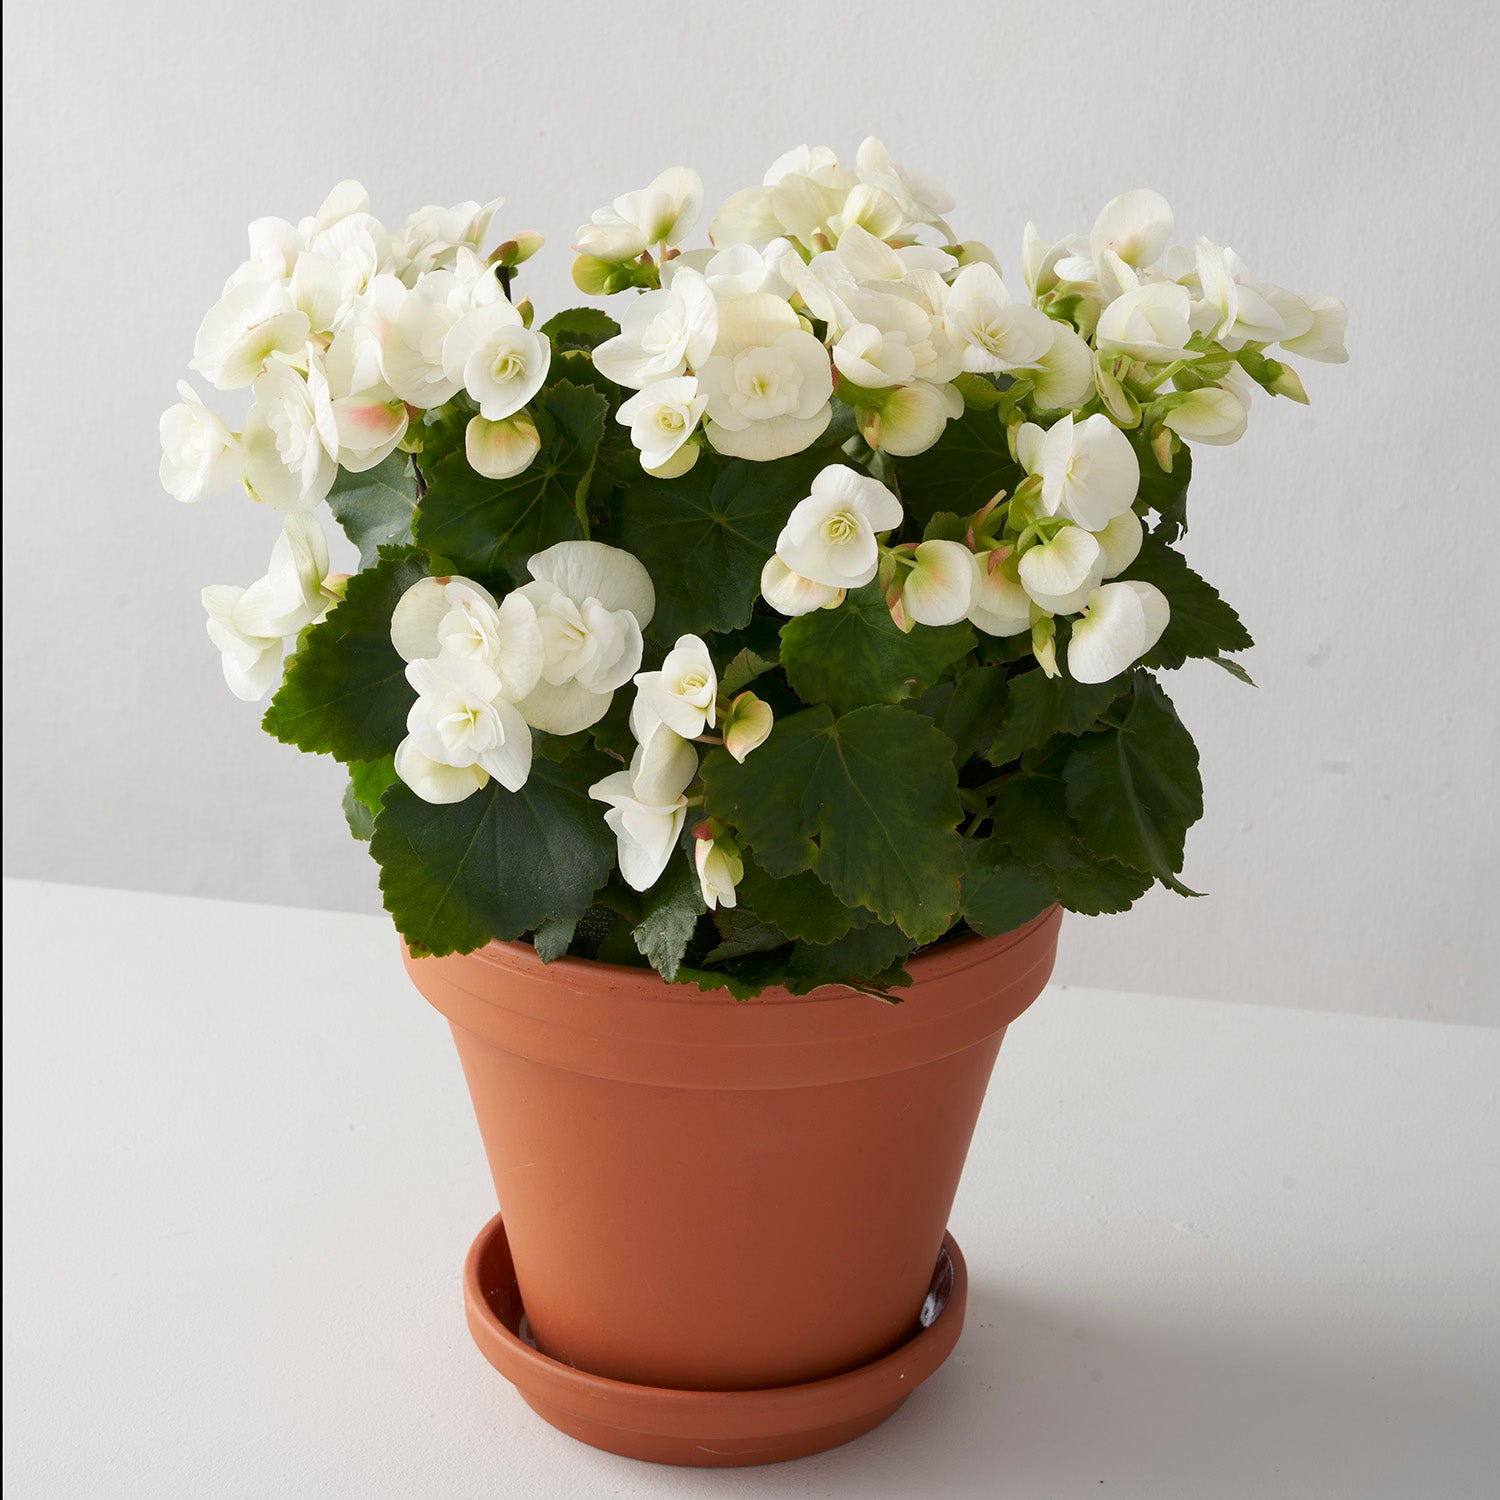 White flowering begonia in clay pot on white background.